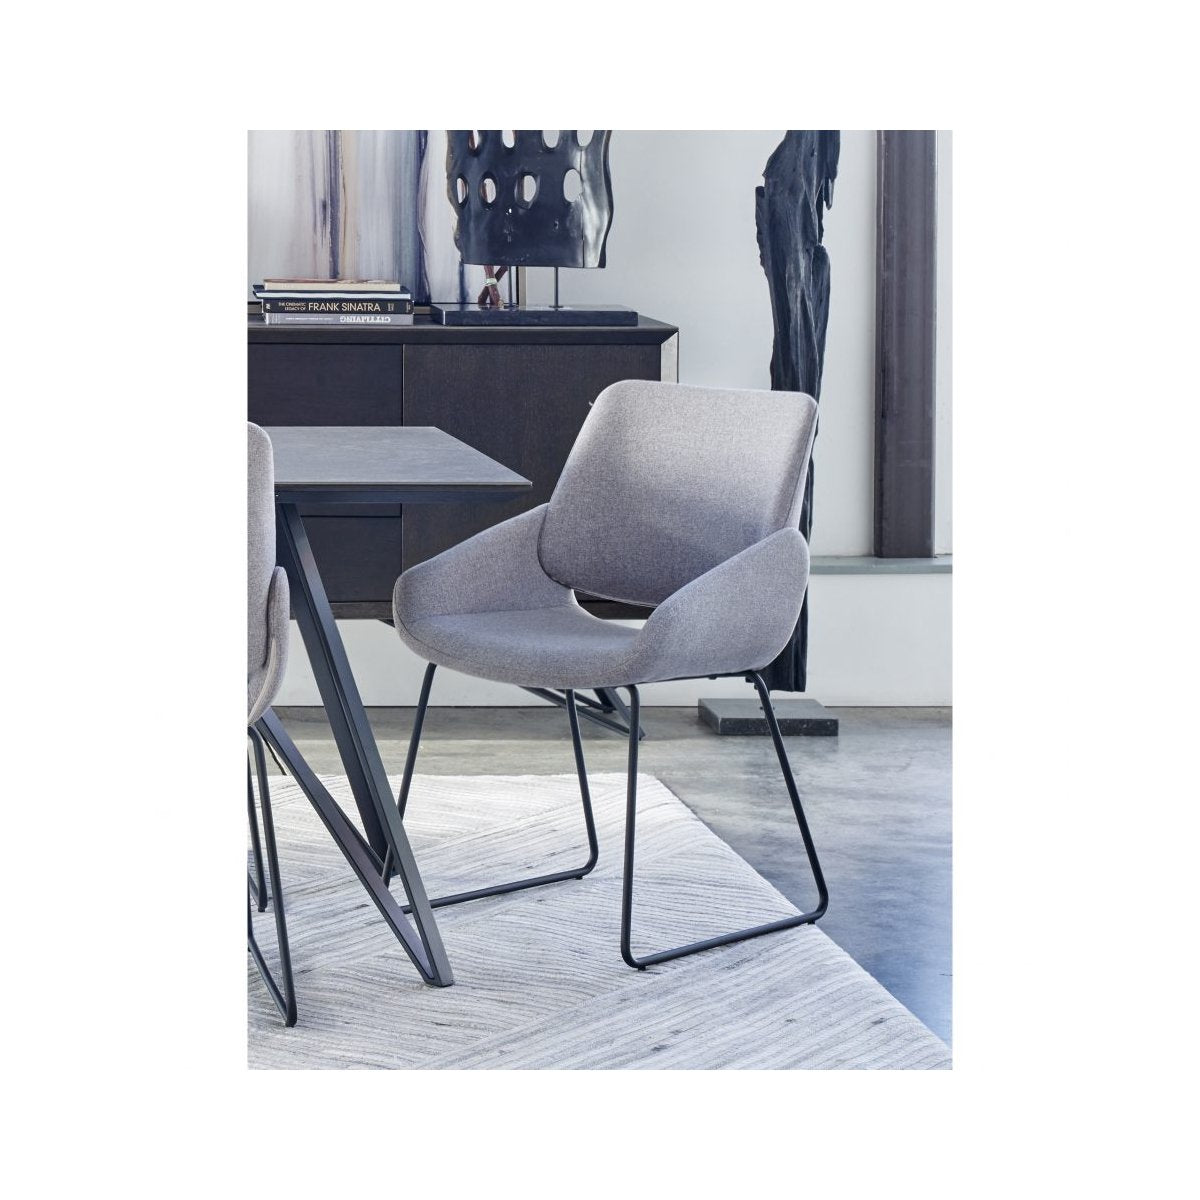 Load image into Gallery viewer, Lisboa Dining Chair Light Grey Dining Chairs Moe&amp;#39;s     Four Hands, Burke Decor, Mid Century Modern Furniture, Old Bones Furniture Company, Old Bones Co, Modern Mid Century, Designer Furniture, https://www.oldbonesco.com/
